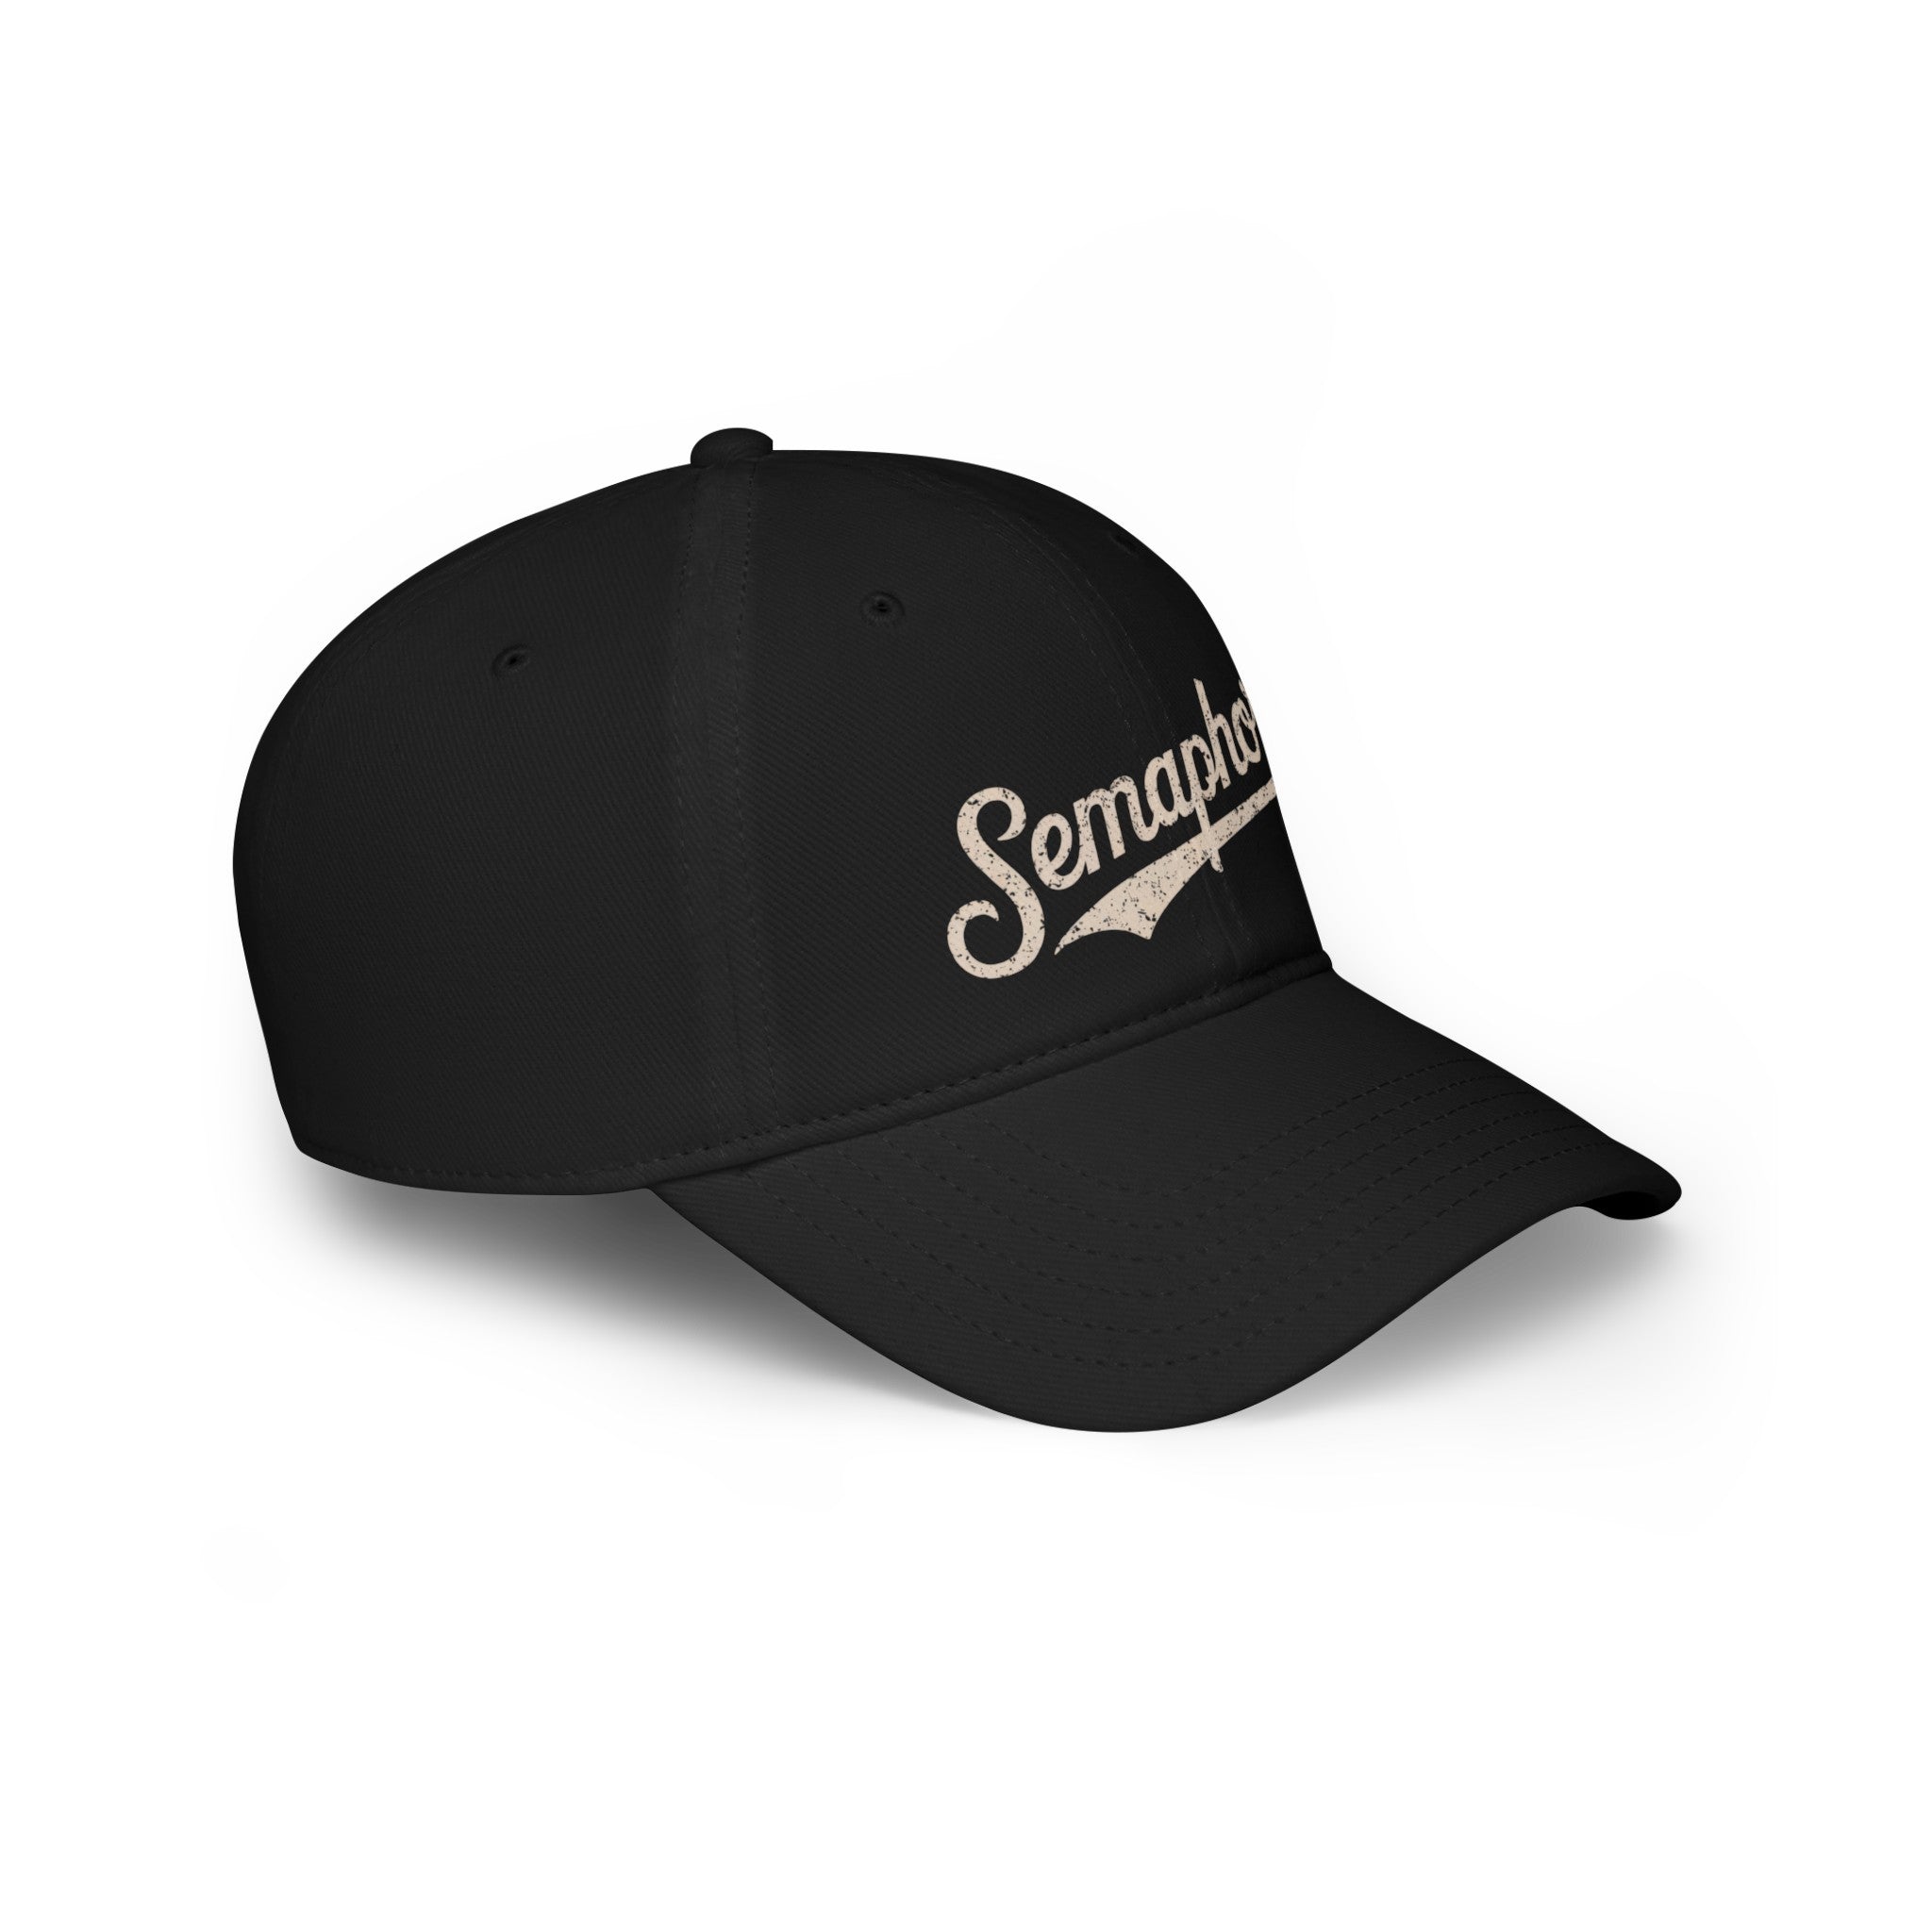 Black baseball cap with curved brim and the word "Semaphore" embroidered in beige on the front, crafted by Semaphore - Hat for lasting durability.